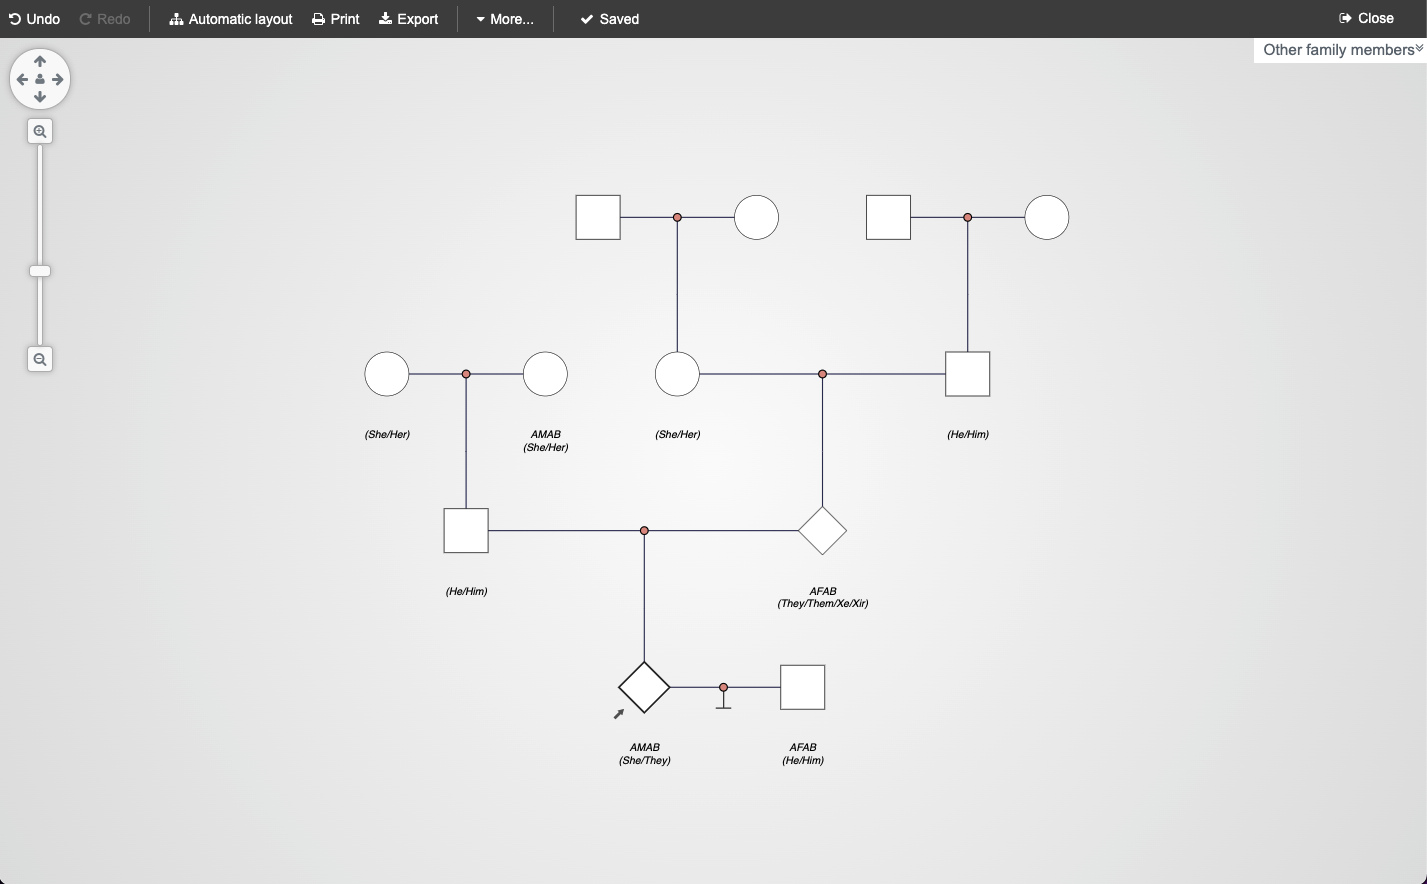 A screenshot of PhenoTips’ pedigree chart builder featuring a family that includes a trans man, a trans woman, and two non-binary individuals, represented according to current best practices.